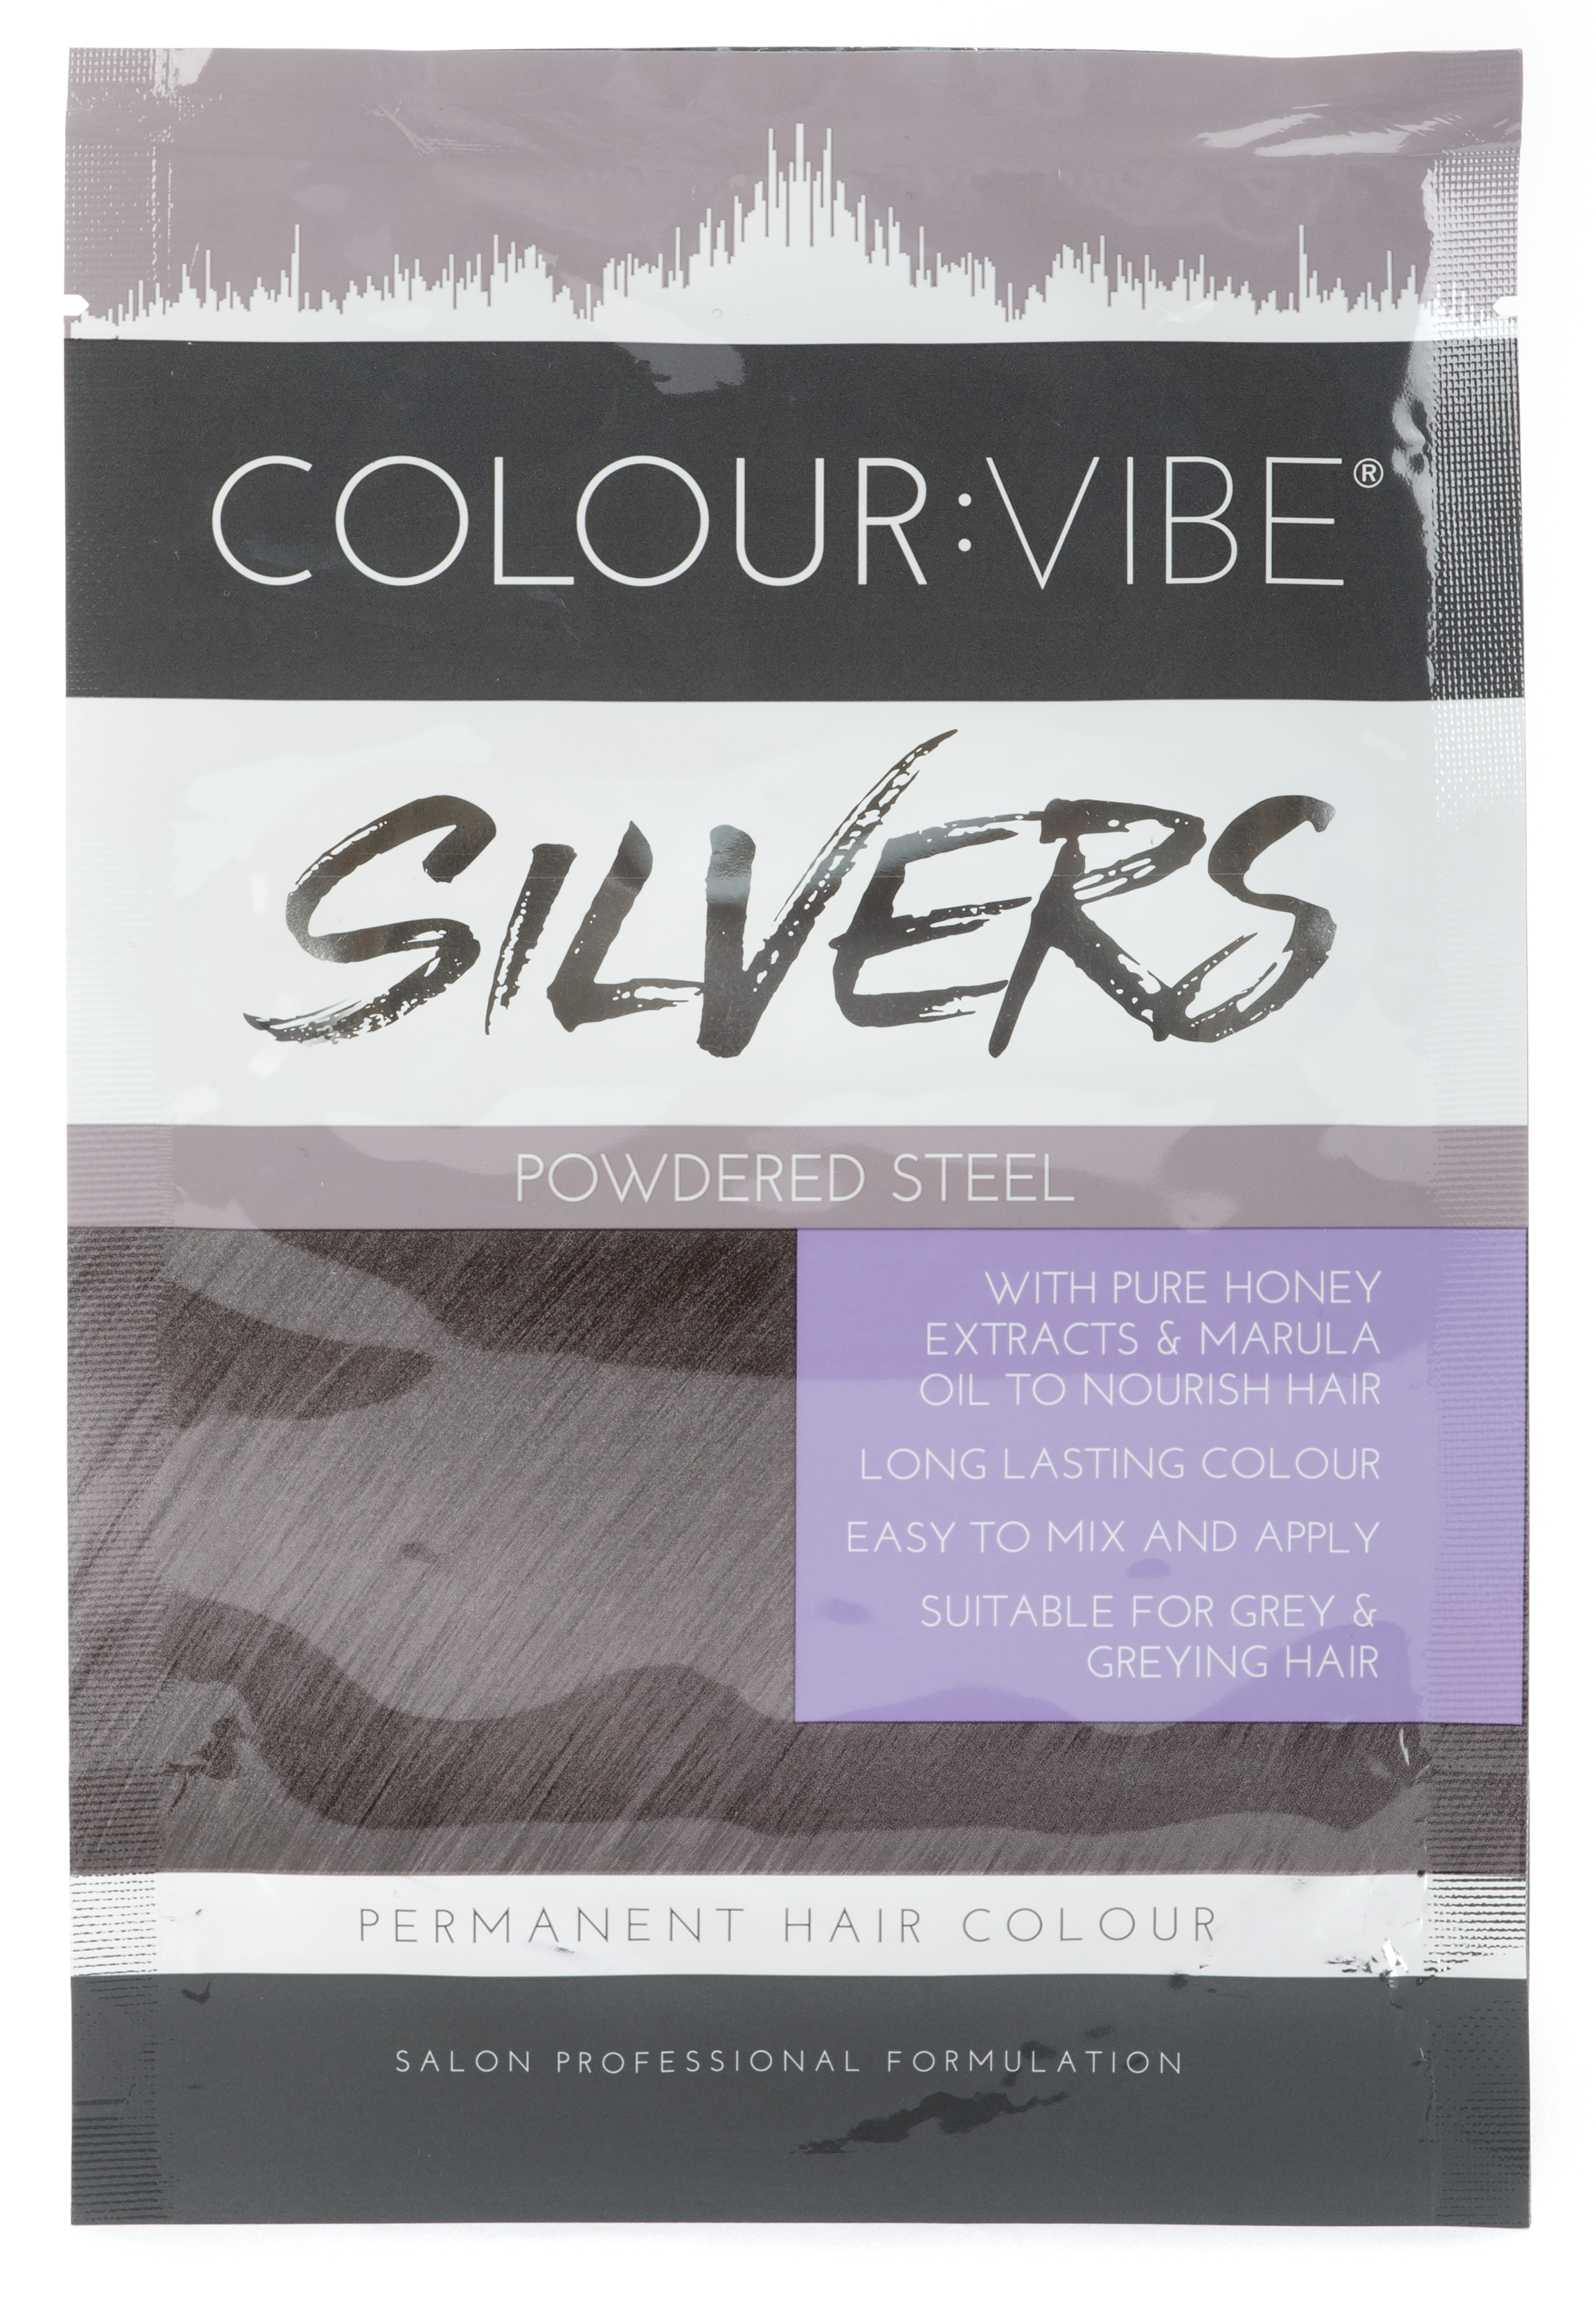 Colour:Vibe Silvers Permanent Powdered Steel